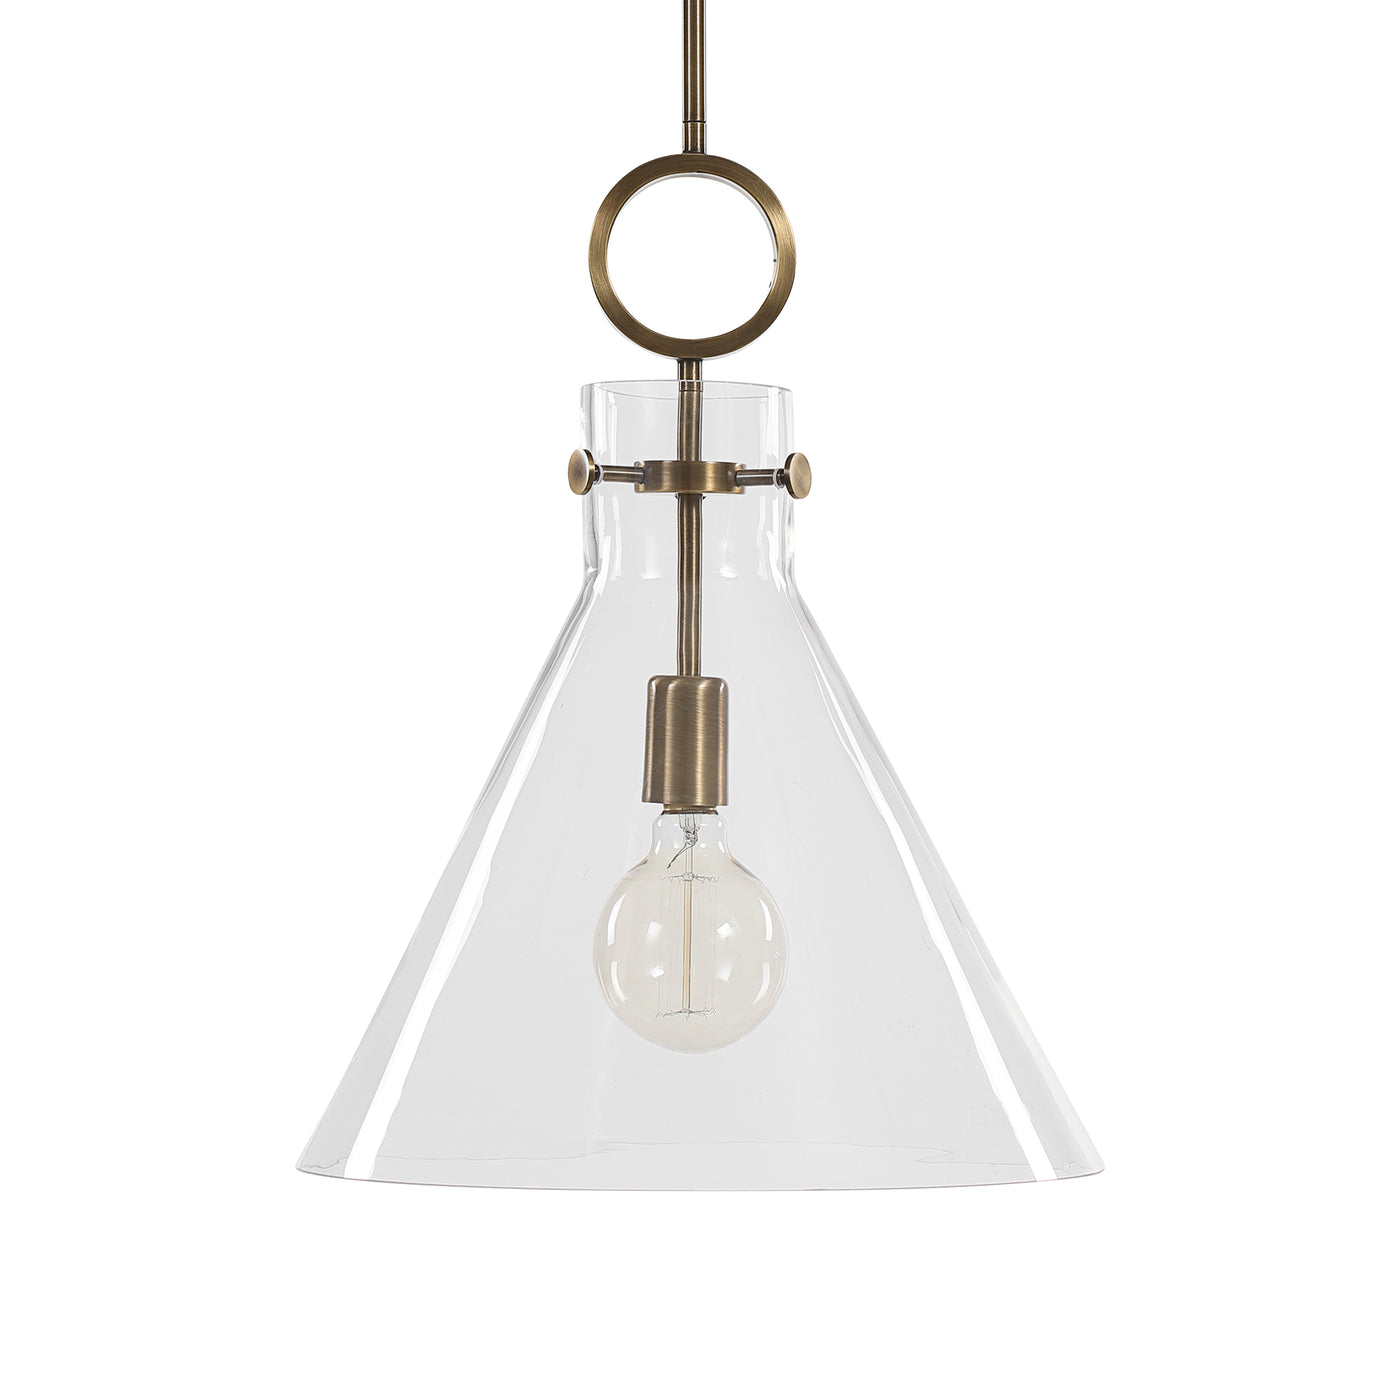 Playful Funnel Shaped Clear Glass Bestows An Almost Whimsical Touch To The Clean Design Of This 1 Lt. Pendant With Aged Br...